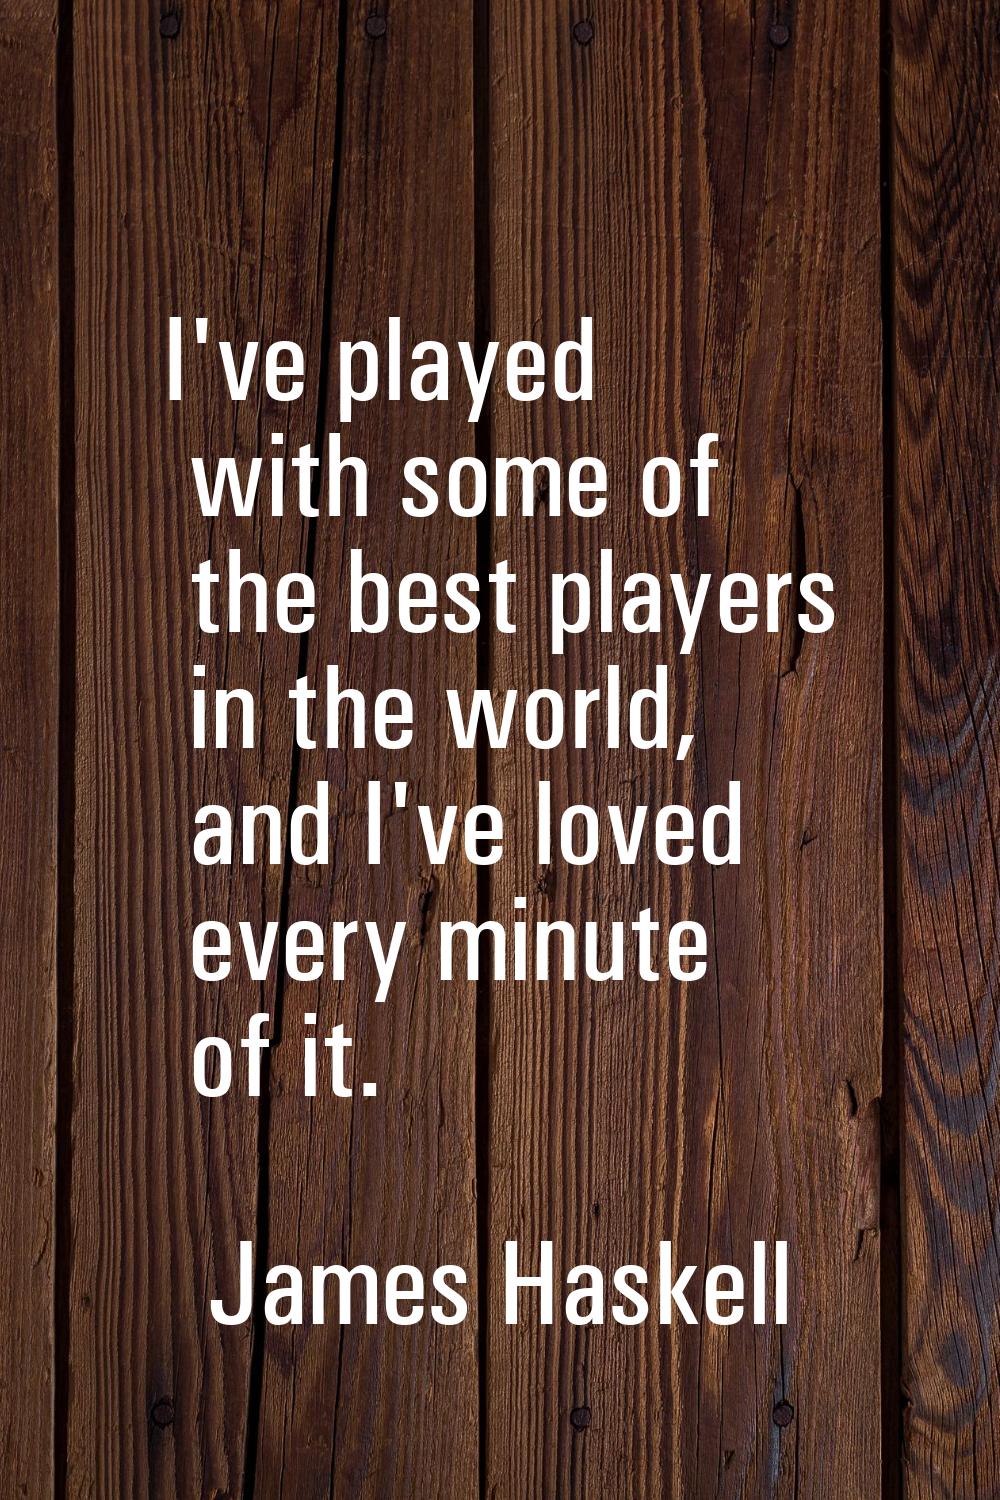 I've played with some of the best players in the world, and I've loved every minute of it.